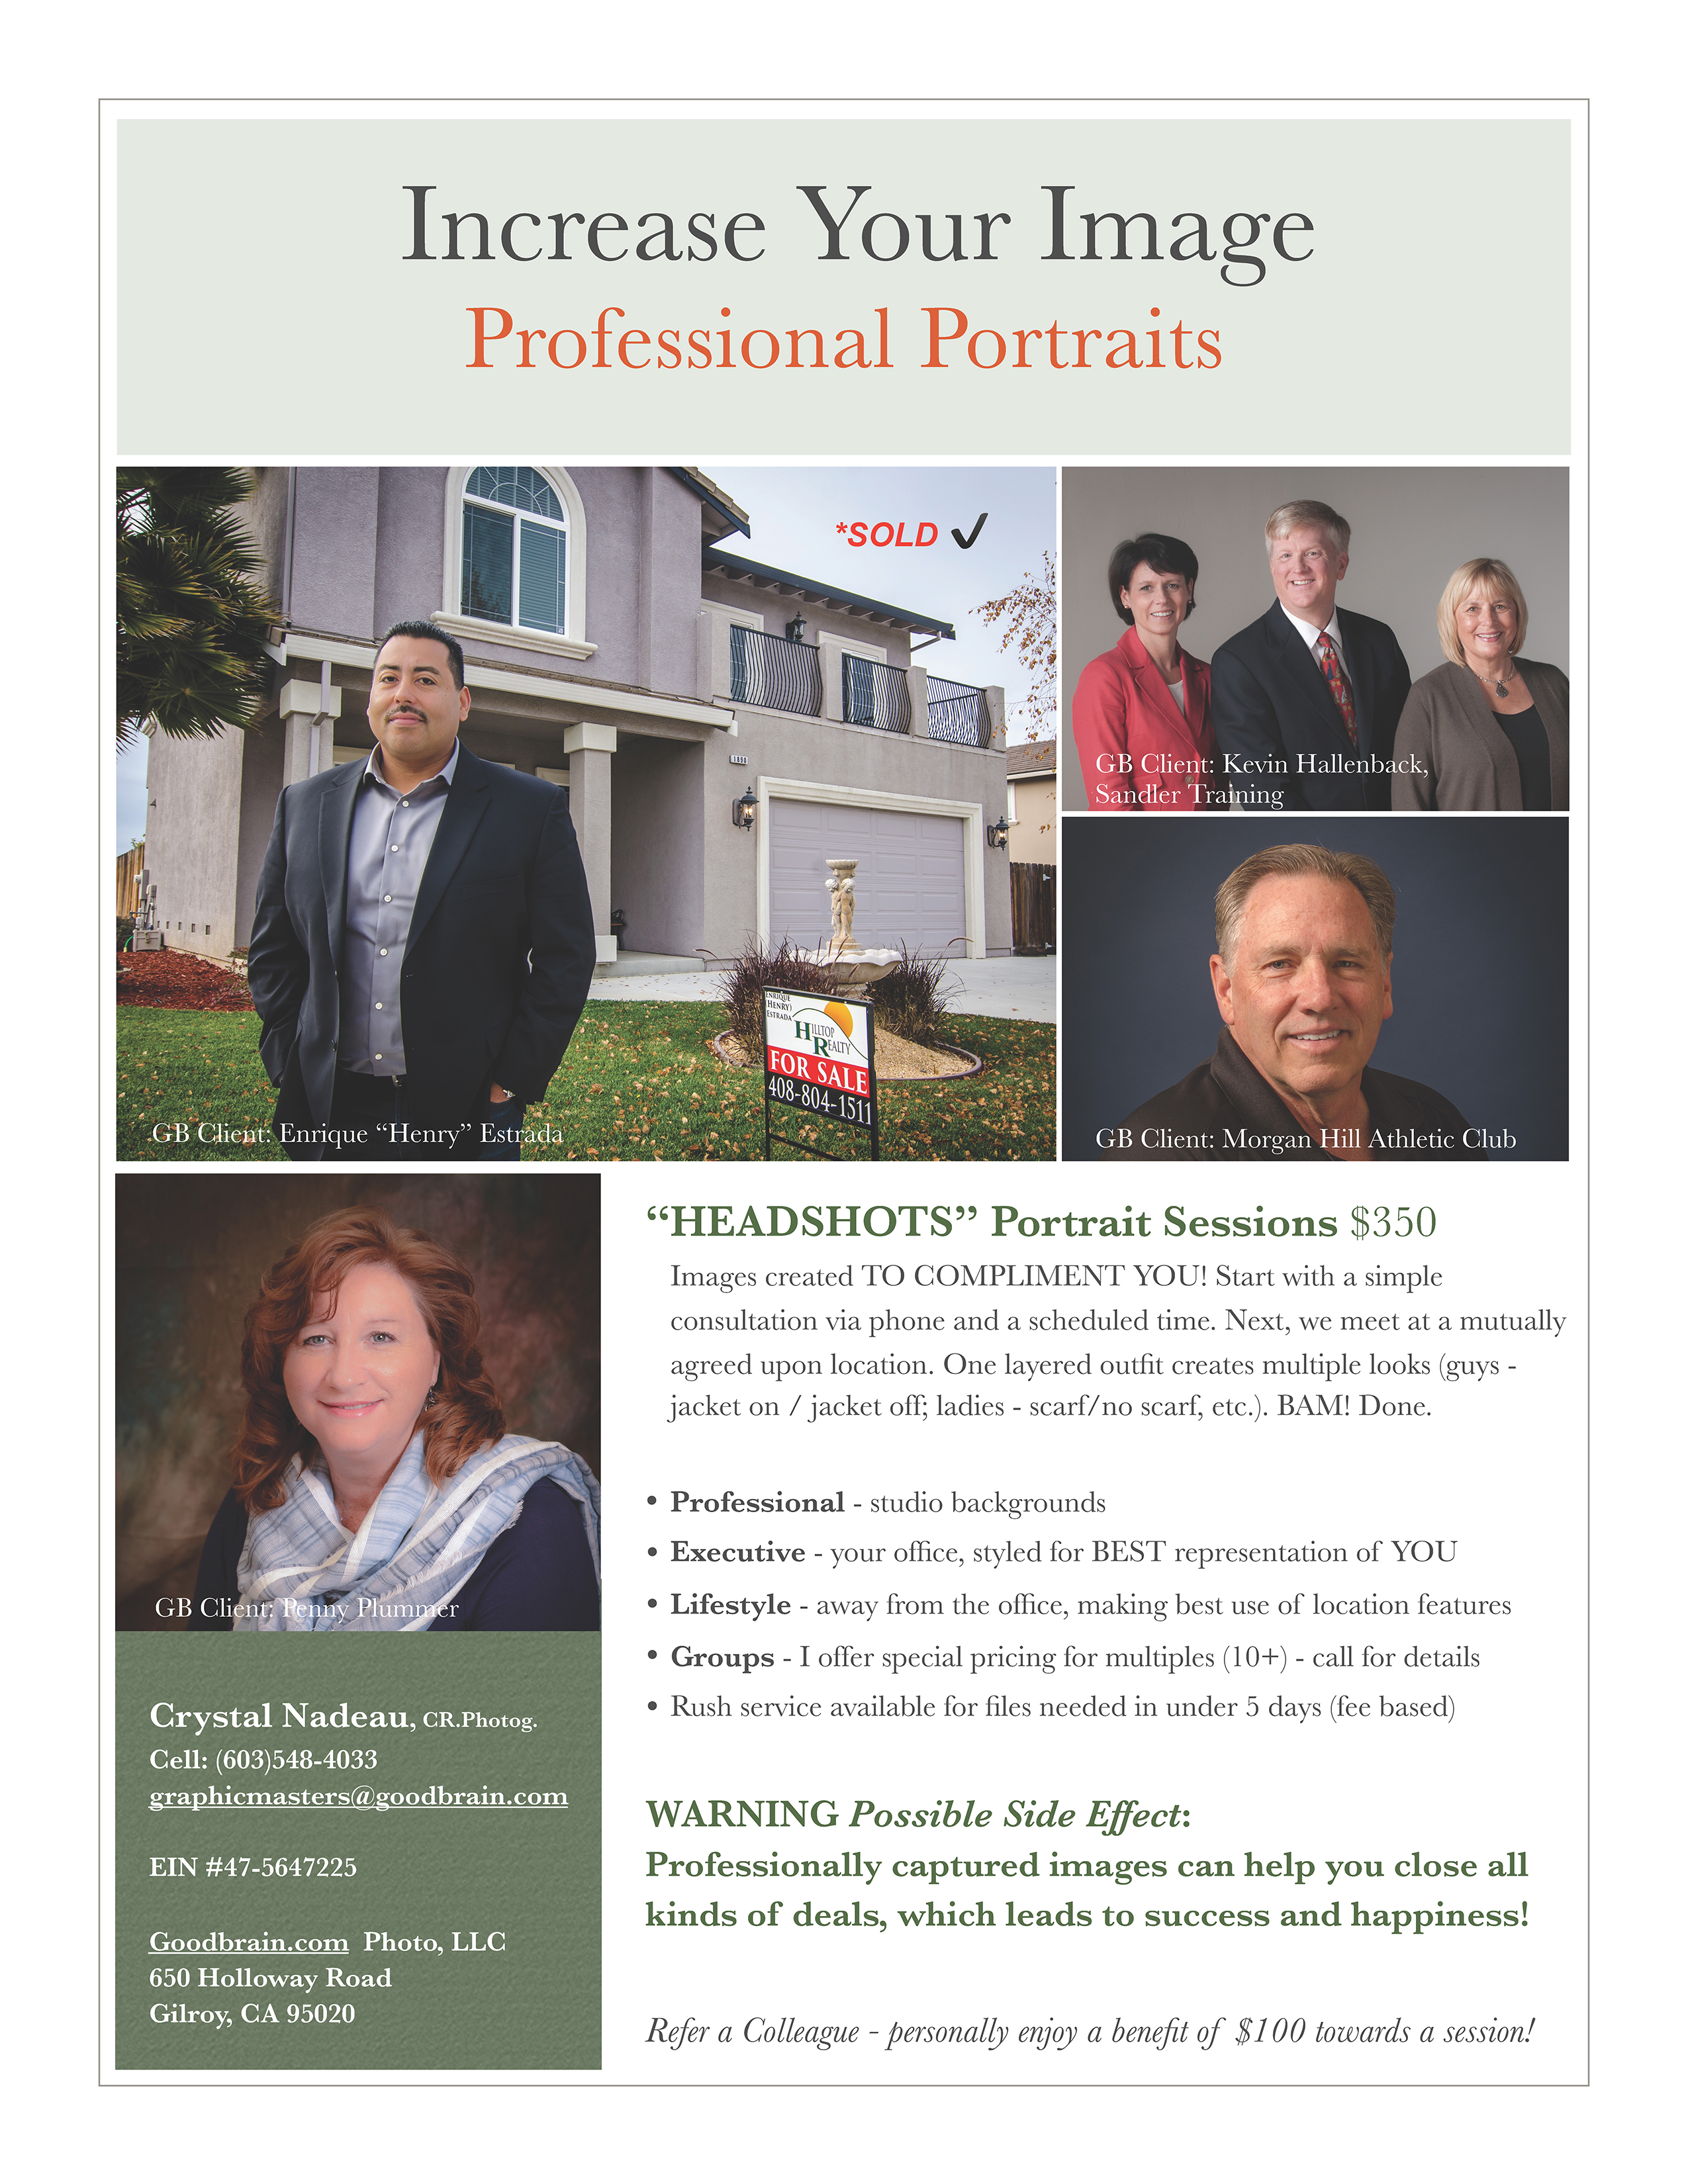 Improve Your Image with Professional Portraits!